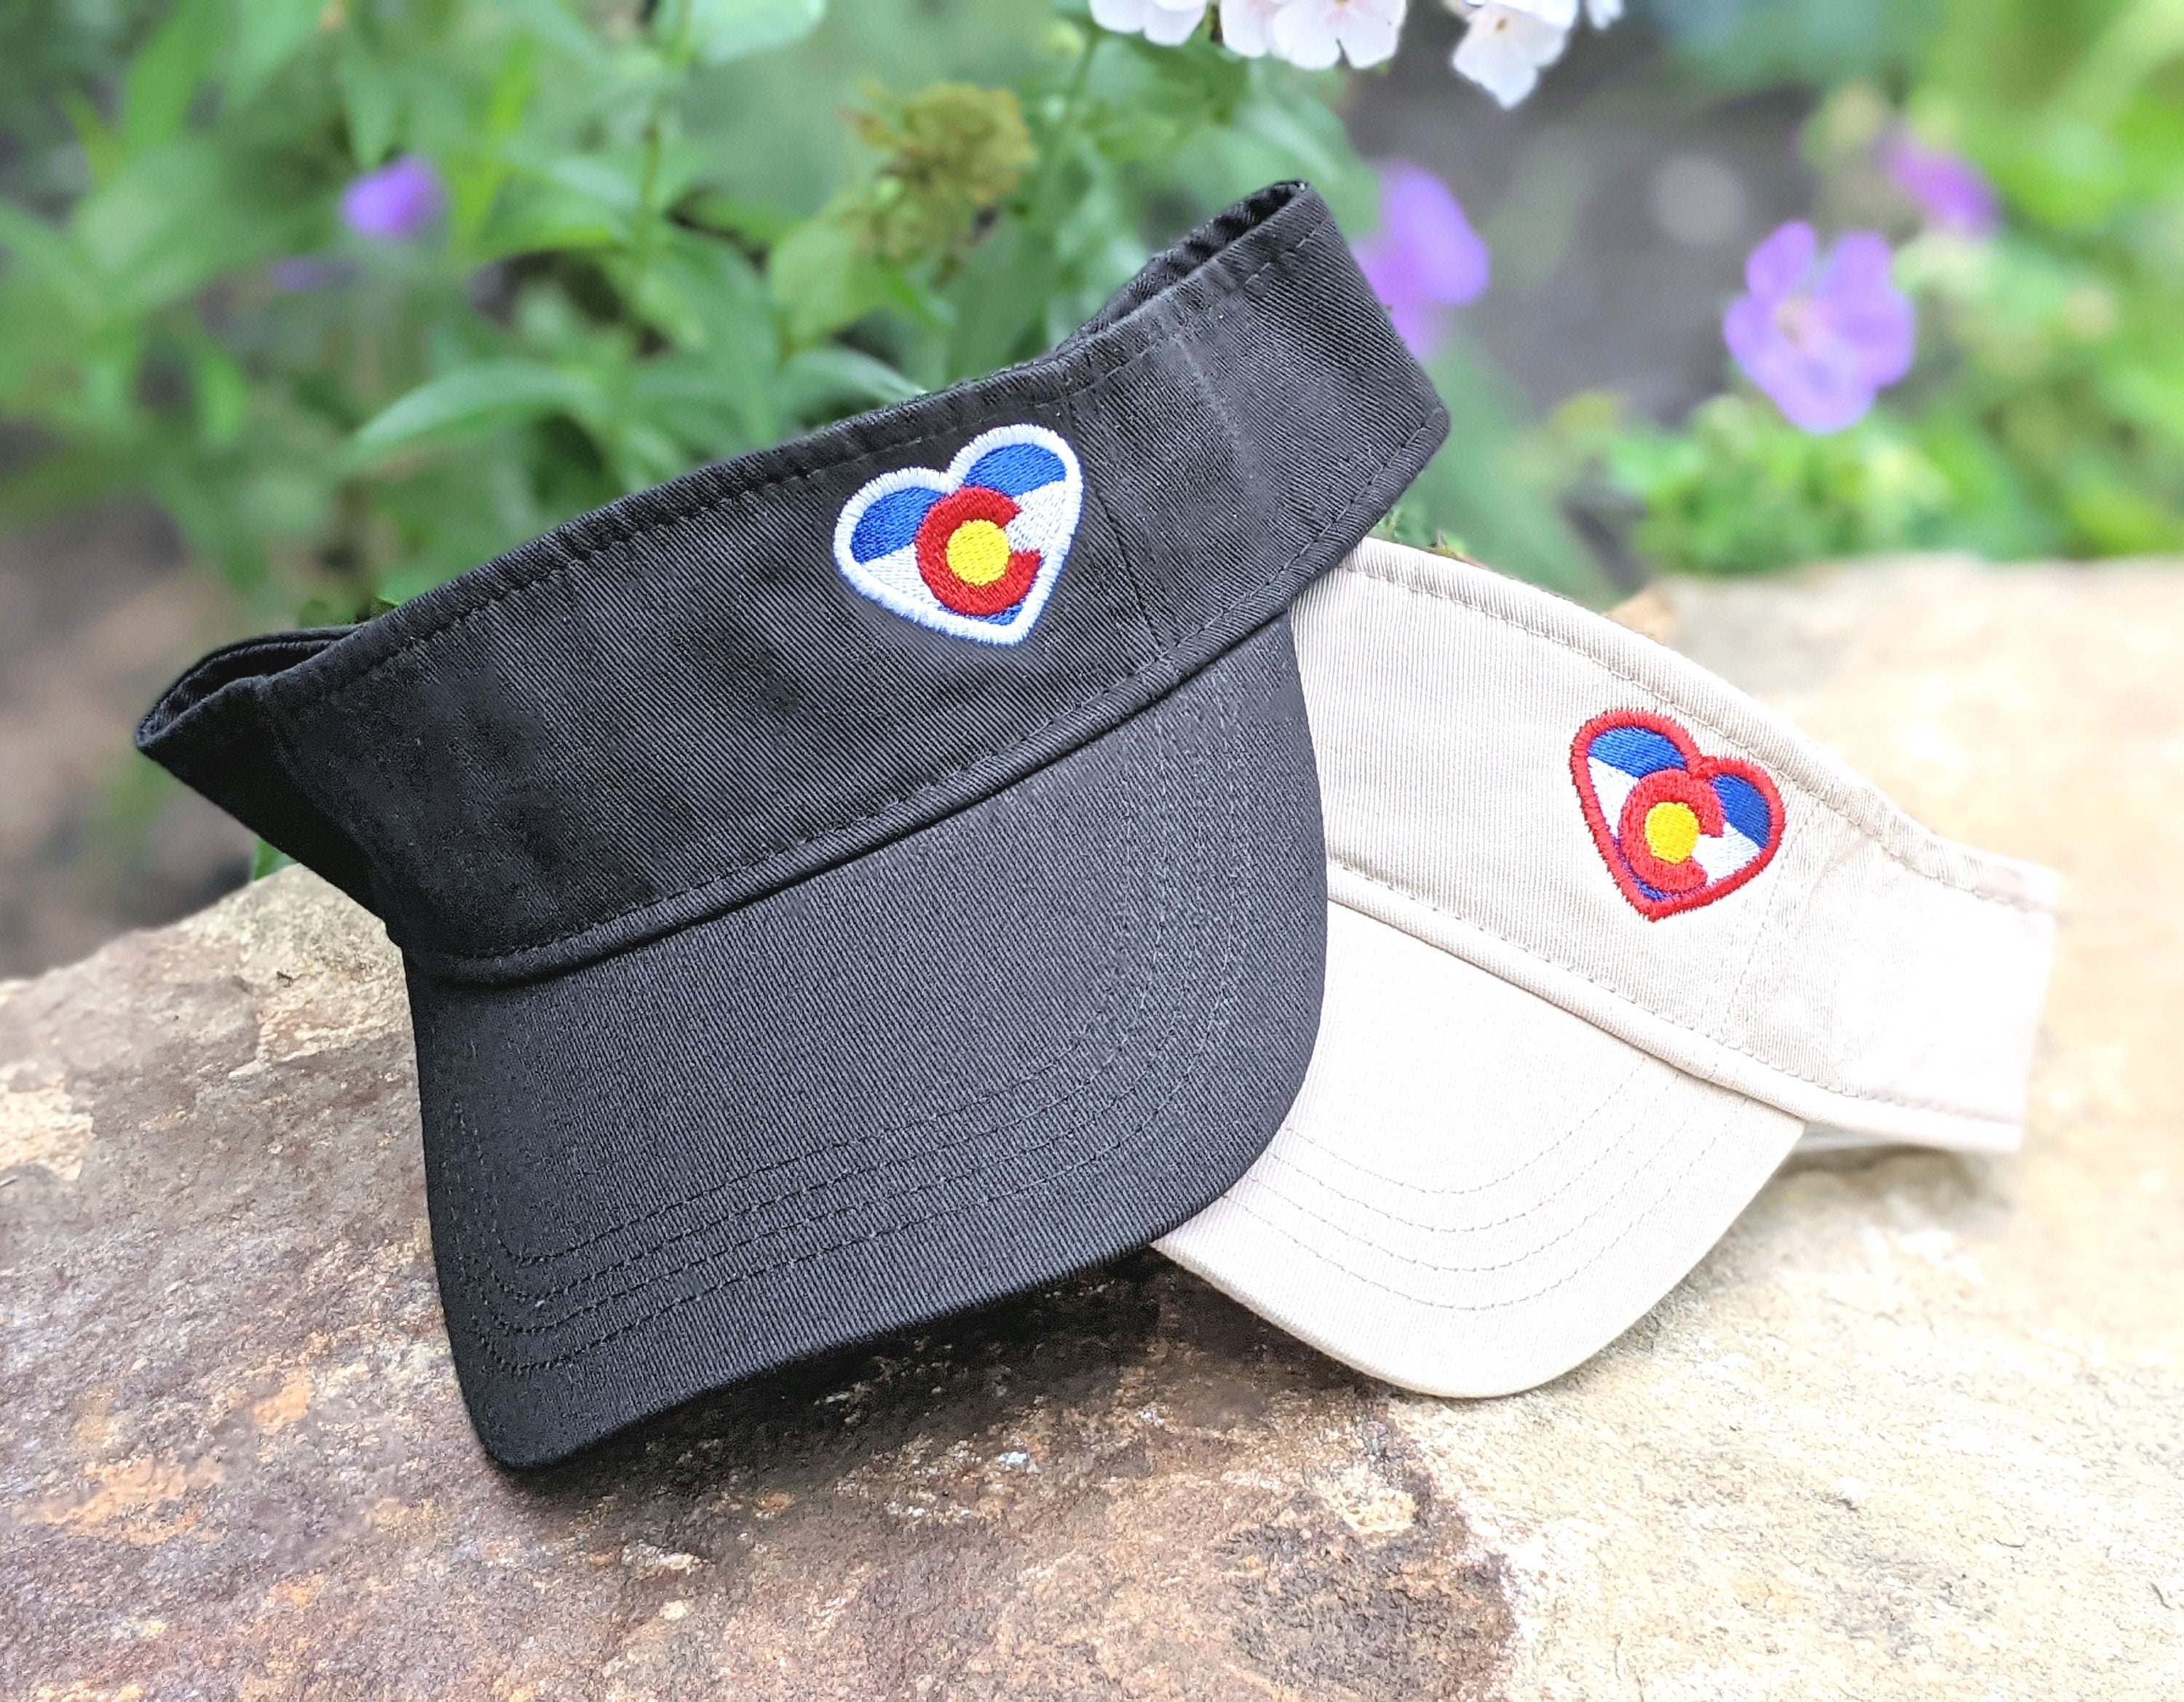 Colorado Visor Heart Shaped State Flag Design Symbol Hat Cap, Embroidered Cute Gift Clothing Present Trip Vacation, Birthday for Her Wife